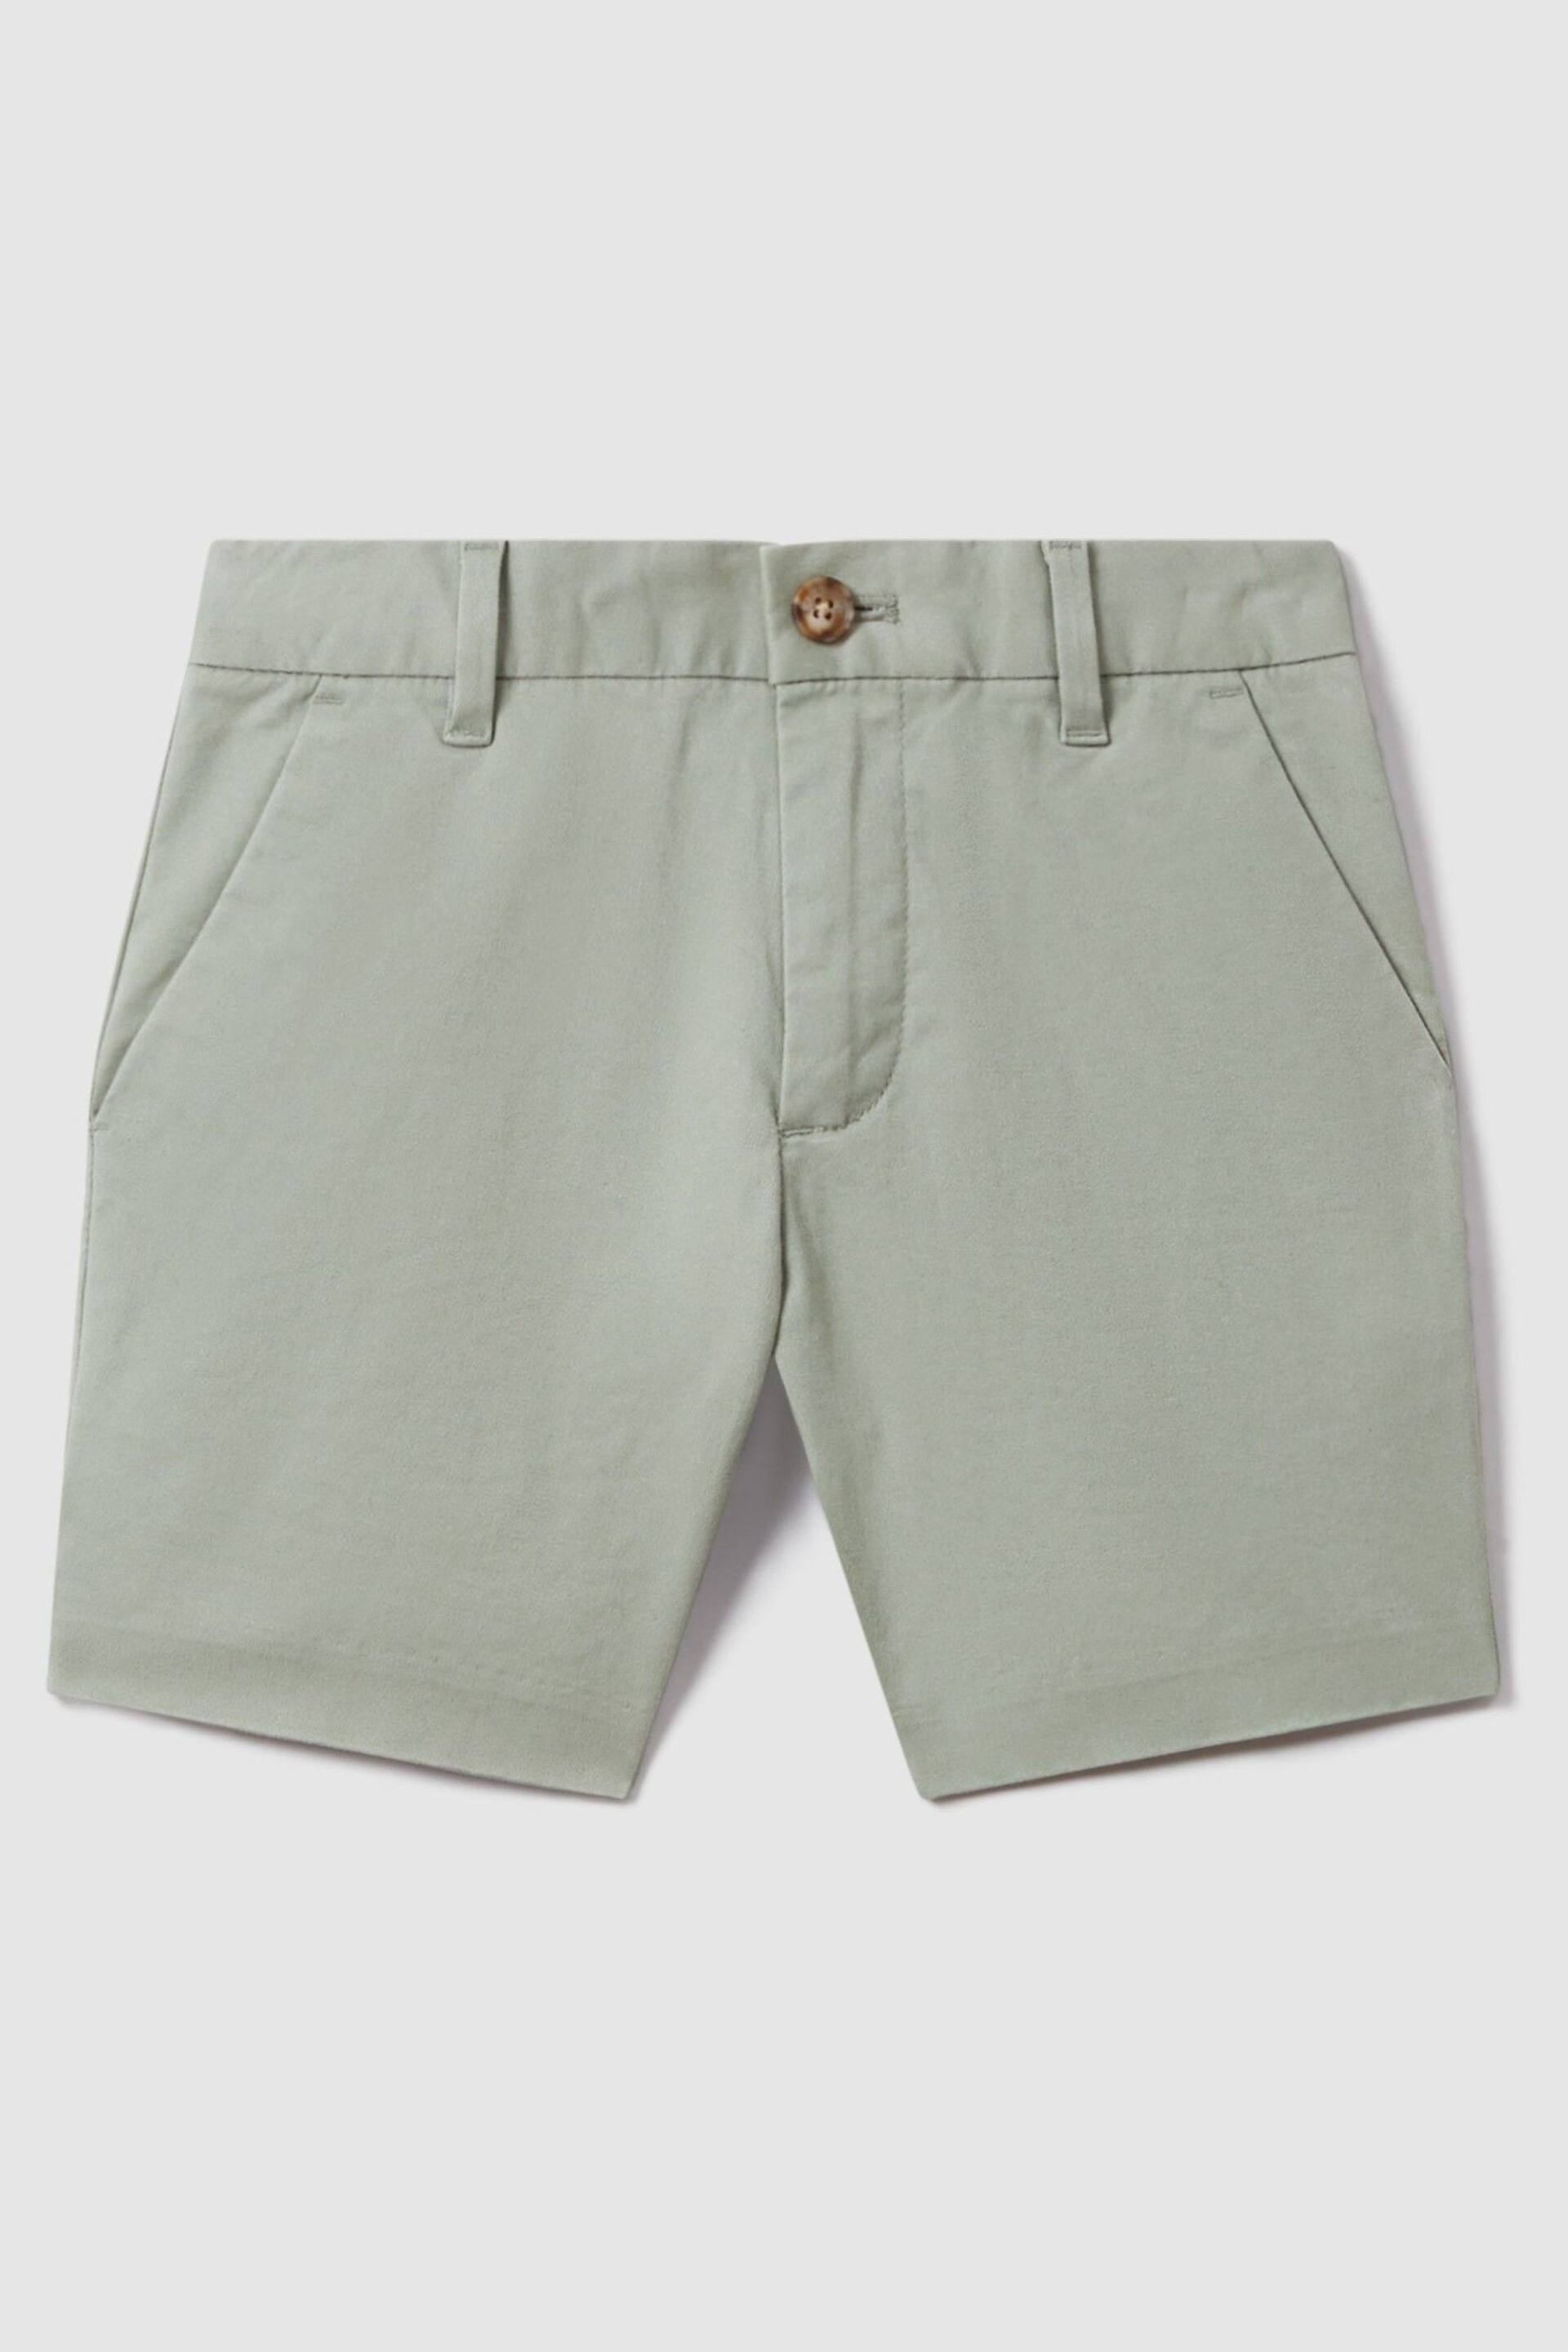 Reiss Pistachio Wicket Teen Casual Chino Shorts - Image 1 of 4